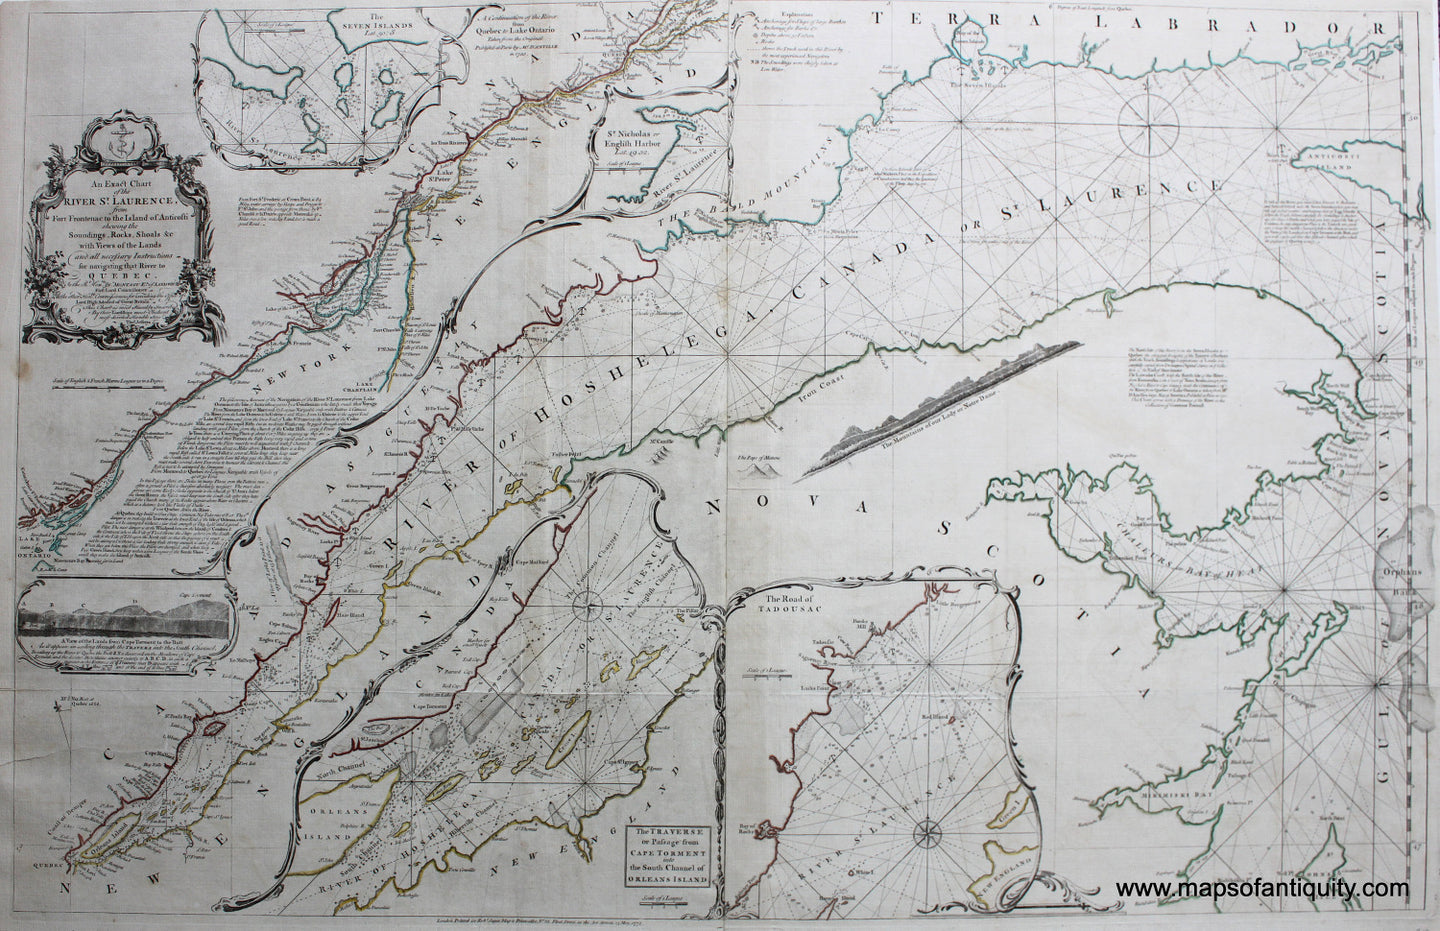 Antique-Hand-Colored-Map-An-Exact-Chart-of-the-River-St.-Lawrence-from-Fort-Frontenac-to-the-Island-of-Anticosti-shewing-the-Soundings-Rocks-Shoals-&c.-with-Views-of-the-Lands-and-all-necessary-Instructions-for-navigating-that-River-to-Quebec-North-America-Canada-1775-Jeffreys-Maps-Of-Antiquity